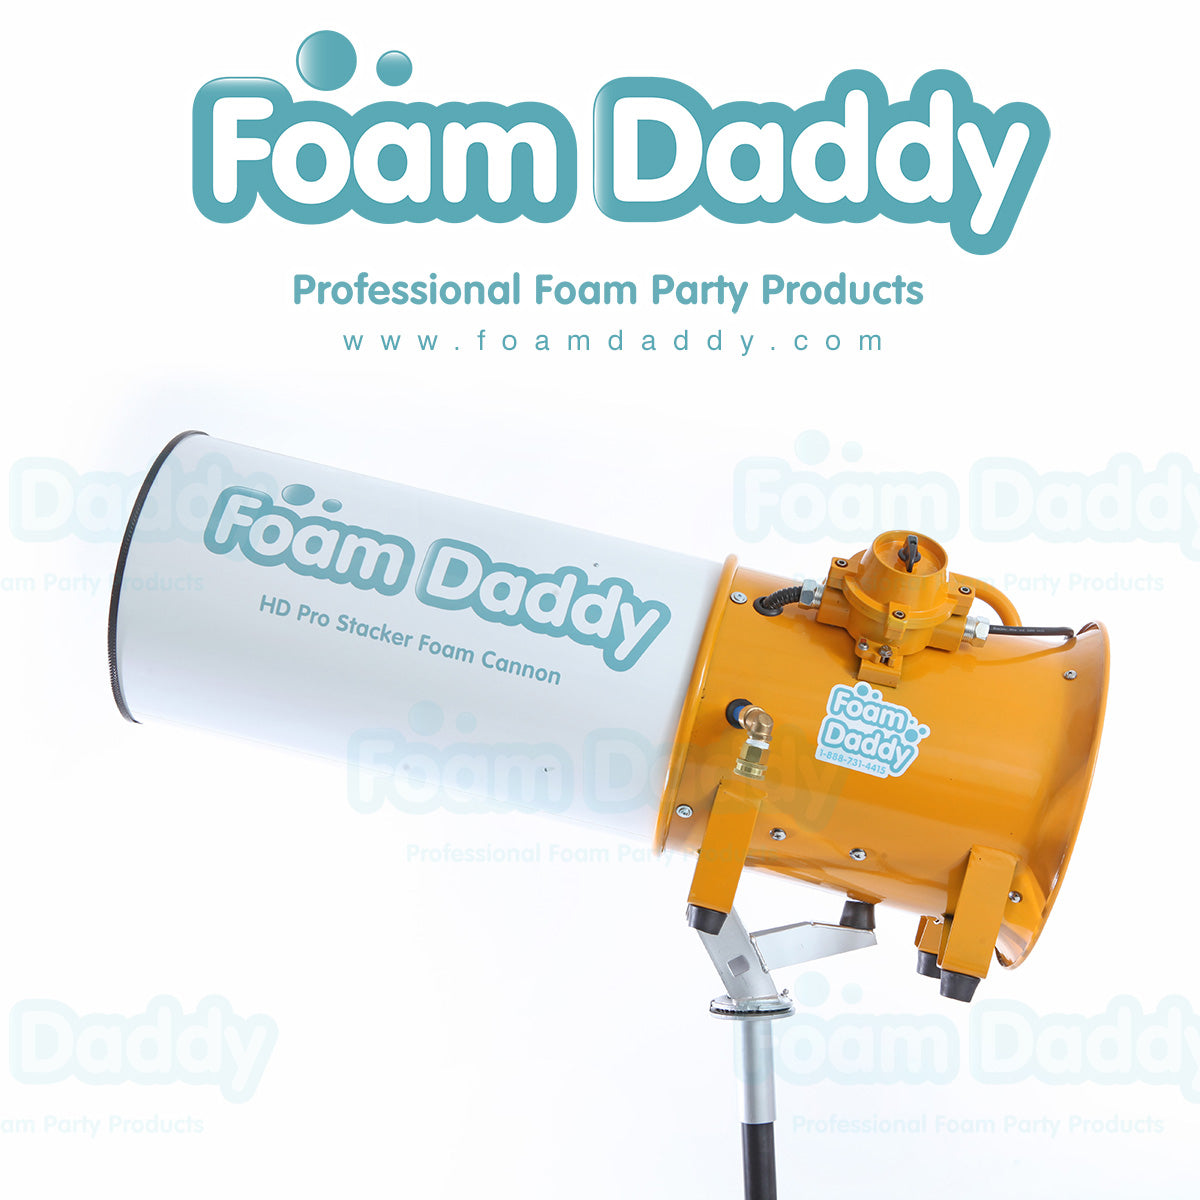  HD Pro Stacker Foam Cannon - Shoots Up to 30ft for Sky